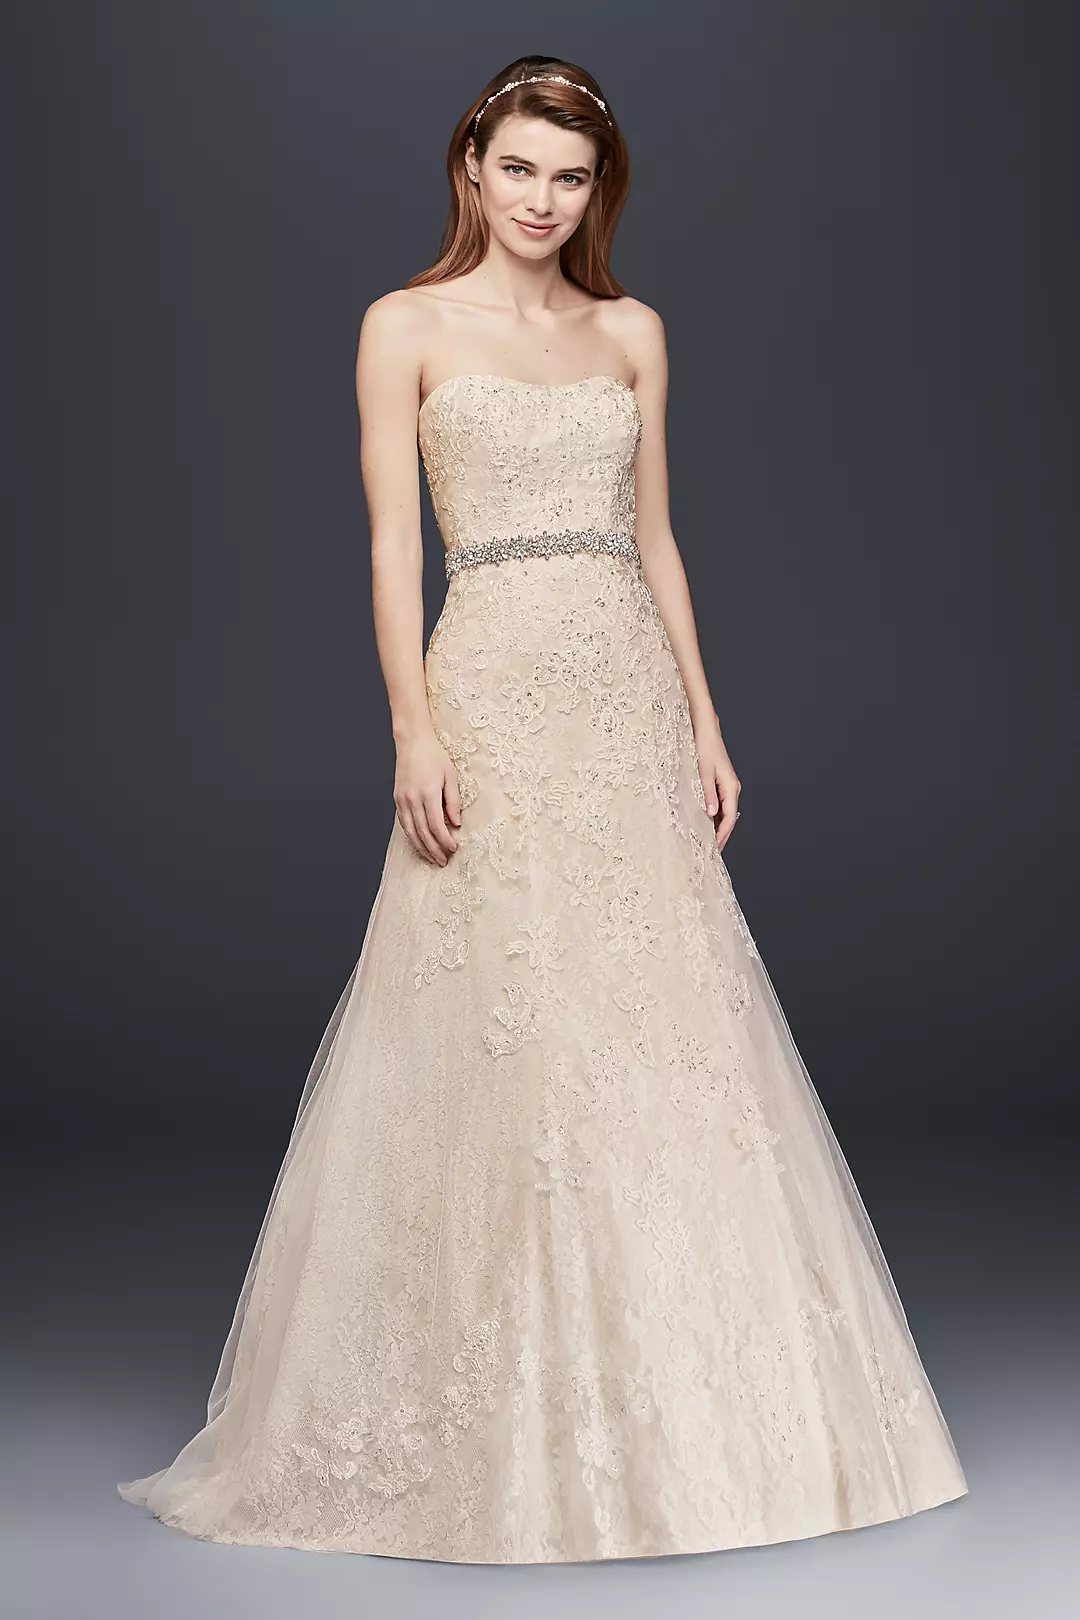 As-Is Lace A-Line Petite Wedding Dress with Beads Image